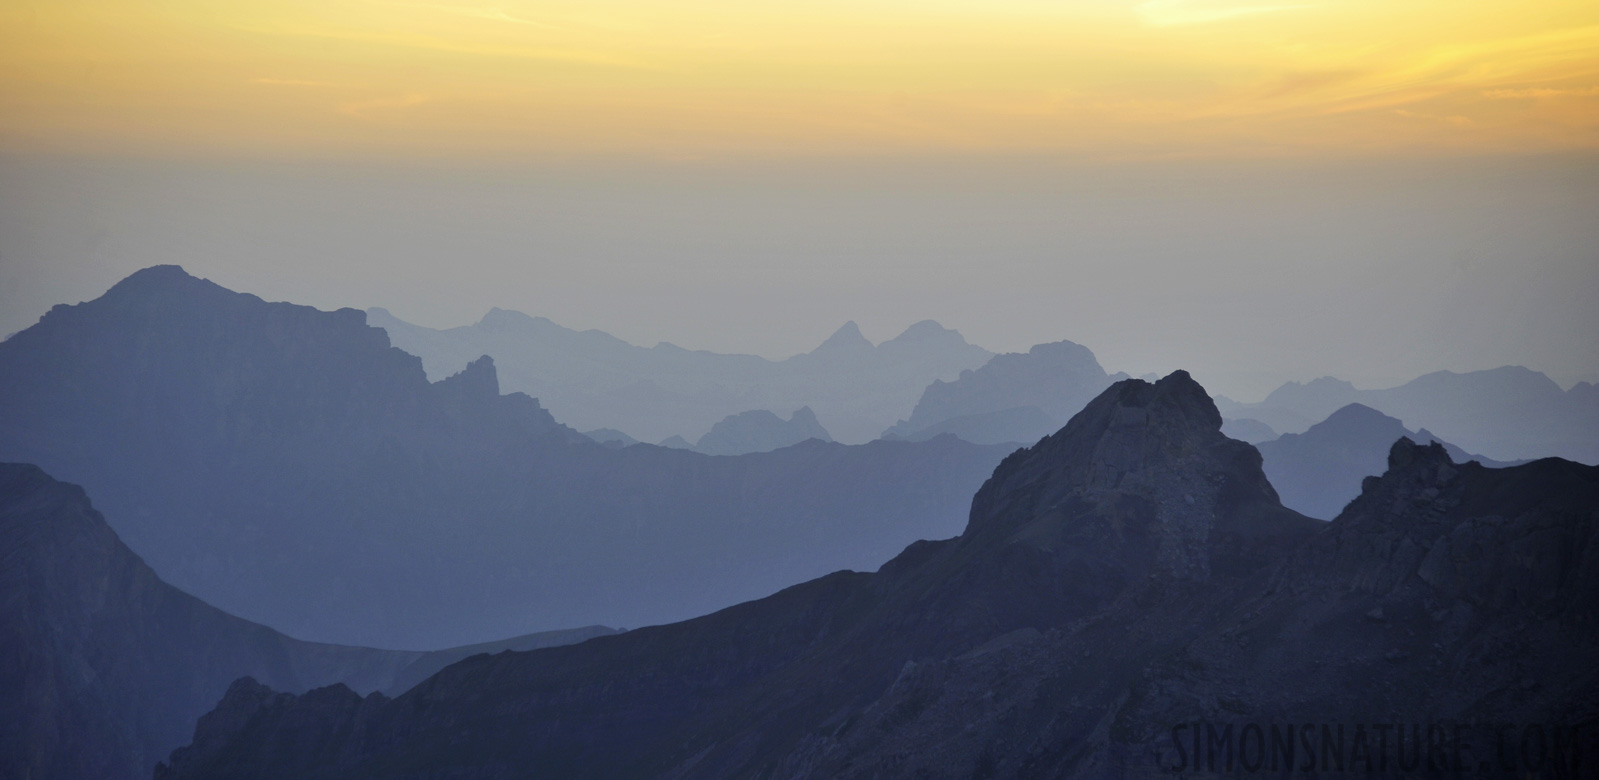 Sunset at 2840 m above sea 